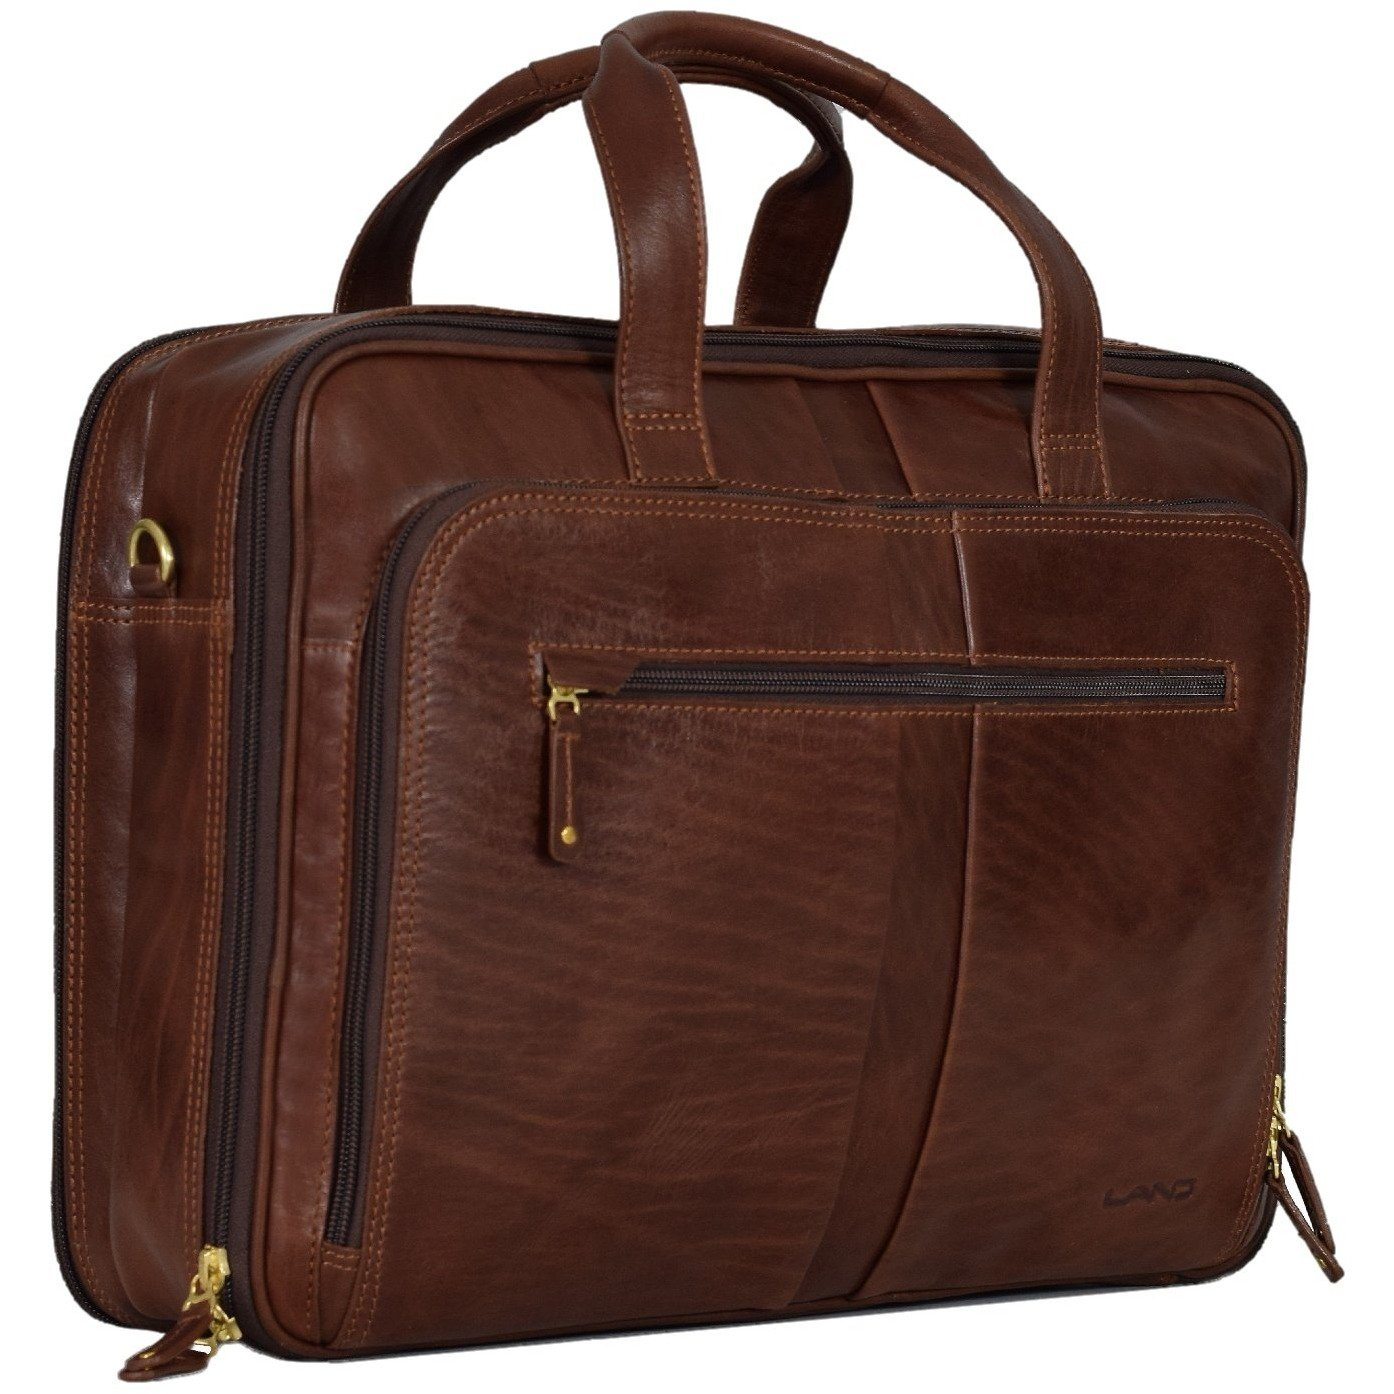 Pro Brief | LAND Leather Goods